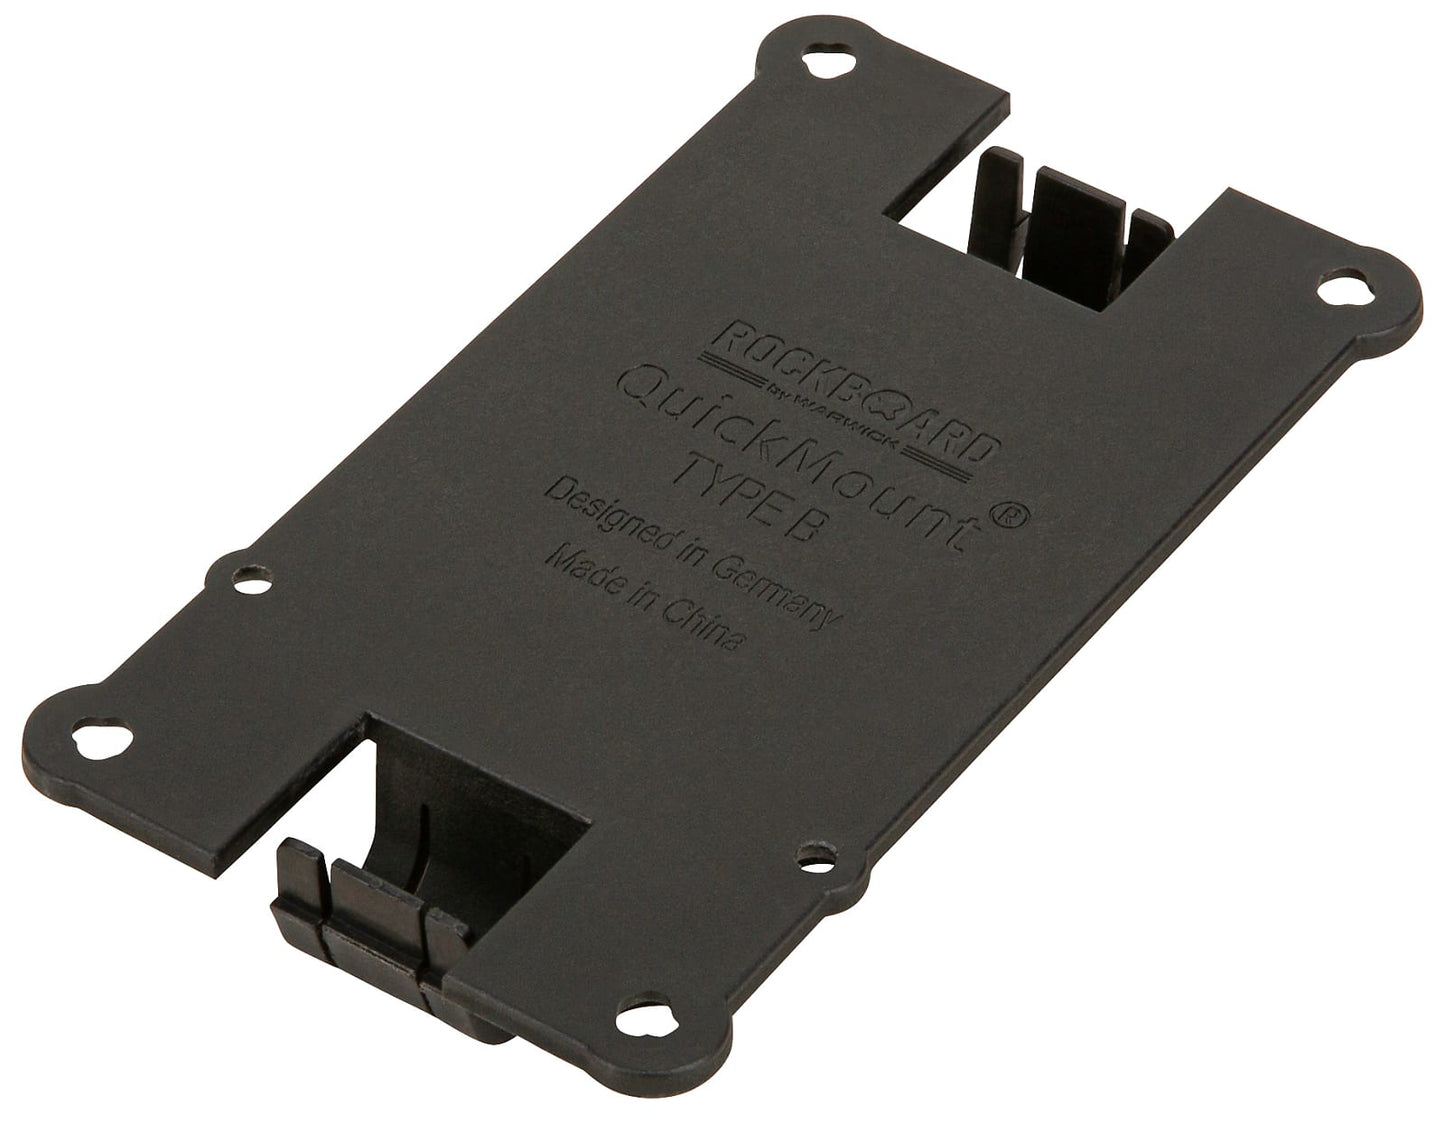 Rockboard Pedalboard Quickmount Type B Pedal Mounting Plate for EarthQuaker Device